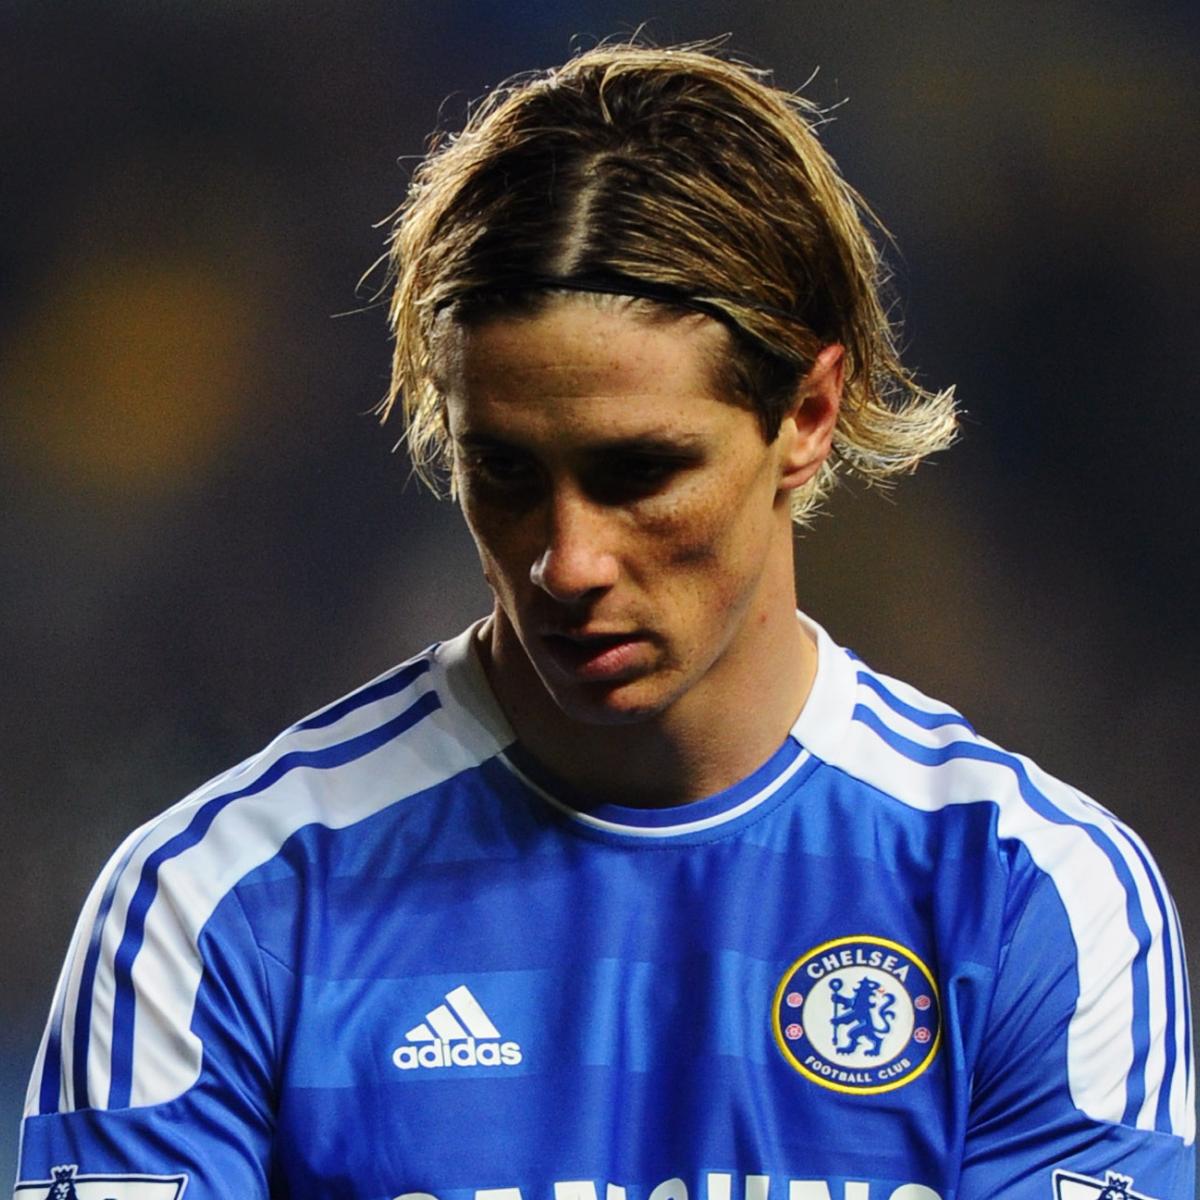 Torres' shirt, the Premier League's third most sold worldwide